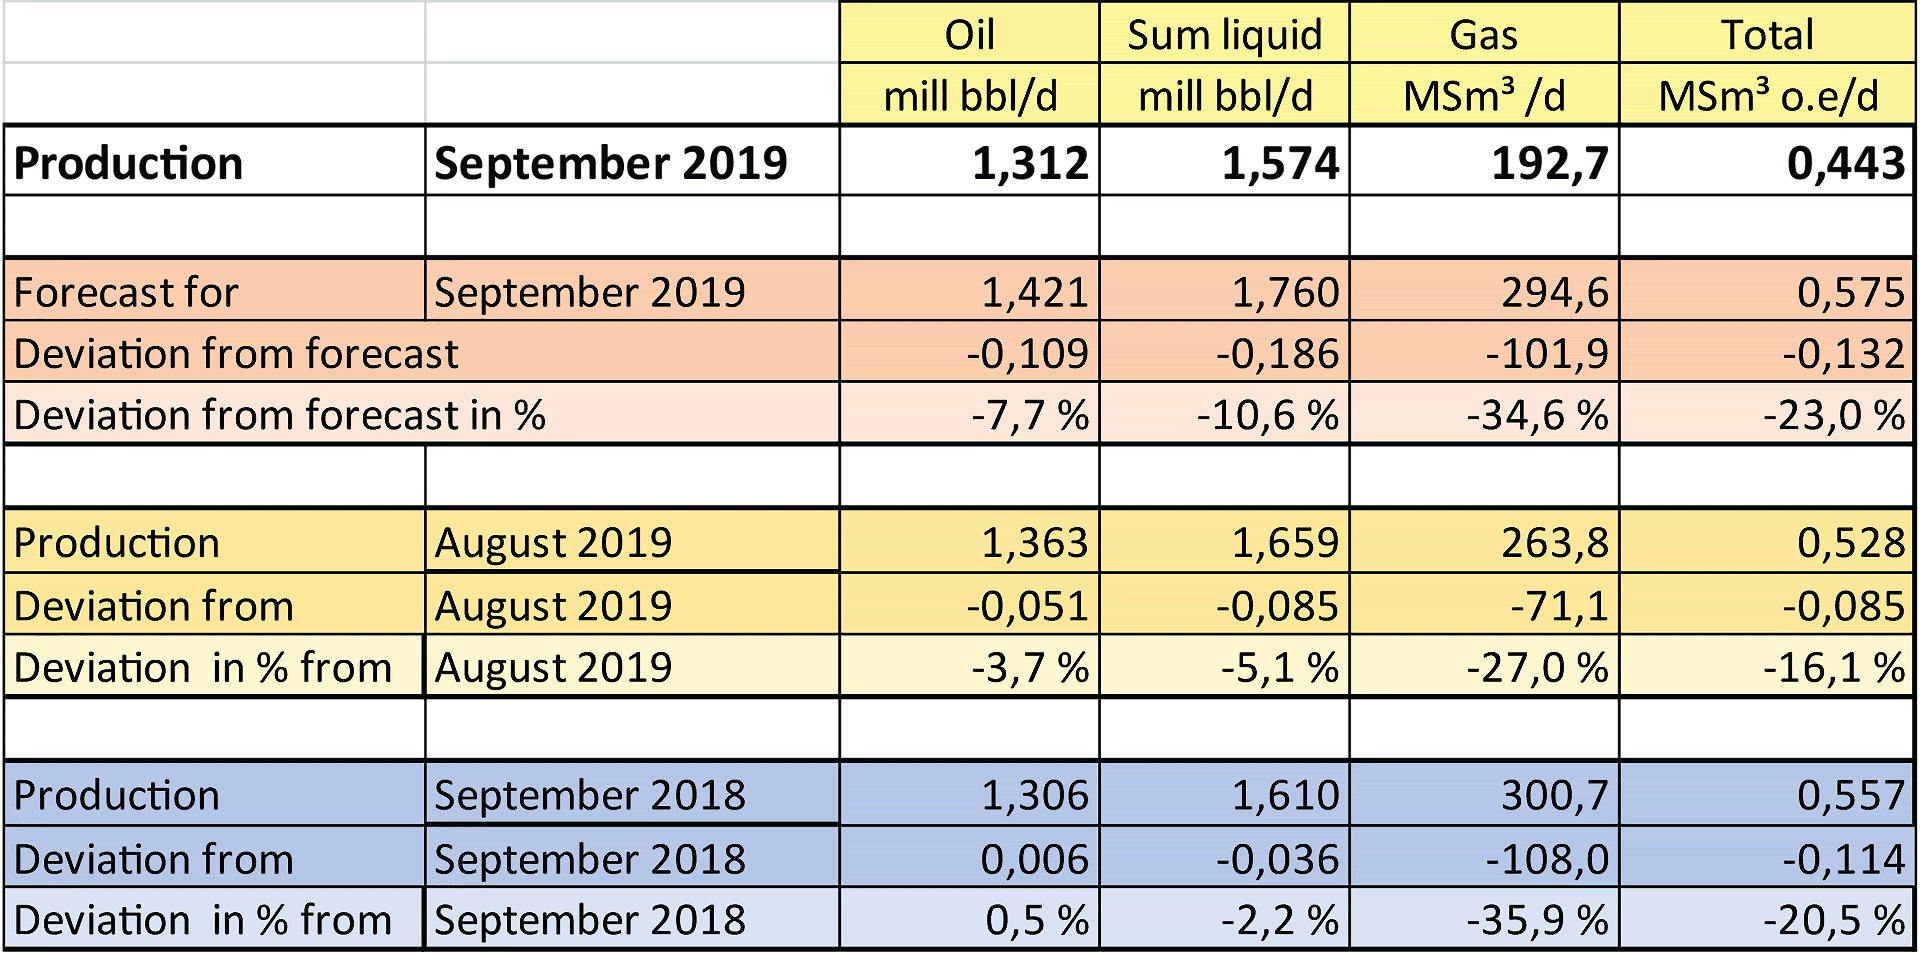 Table showing production of oil and gas for September 2019